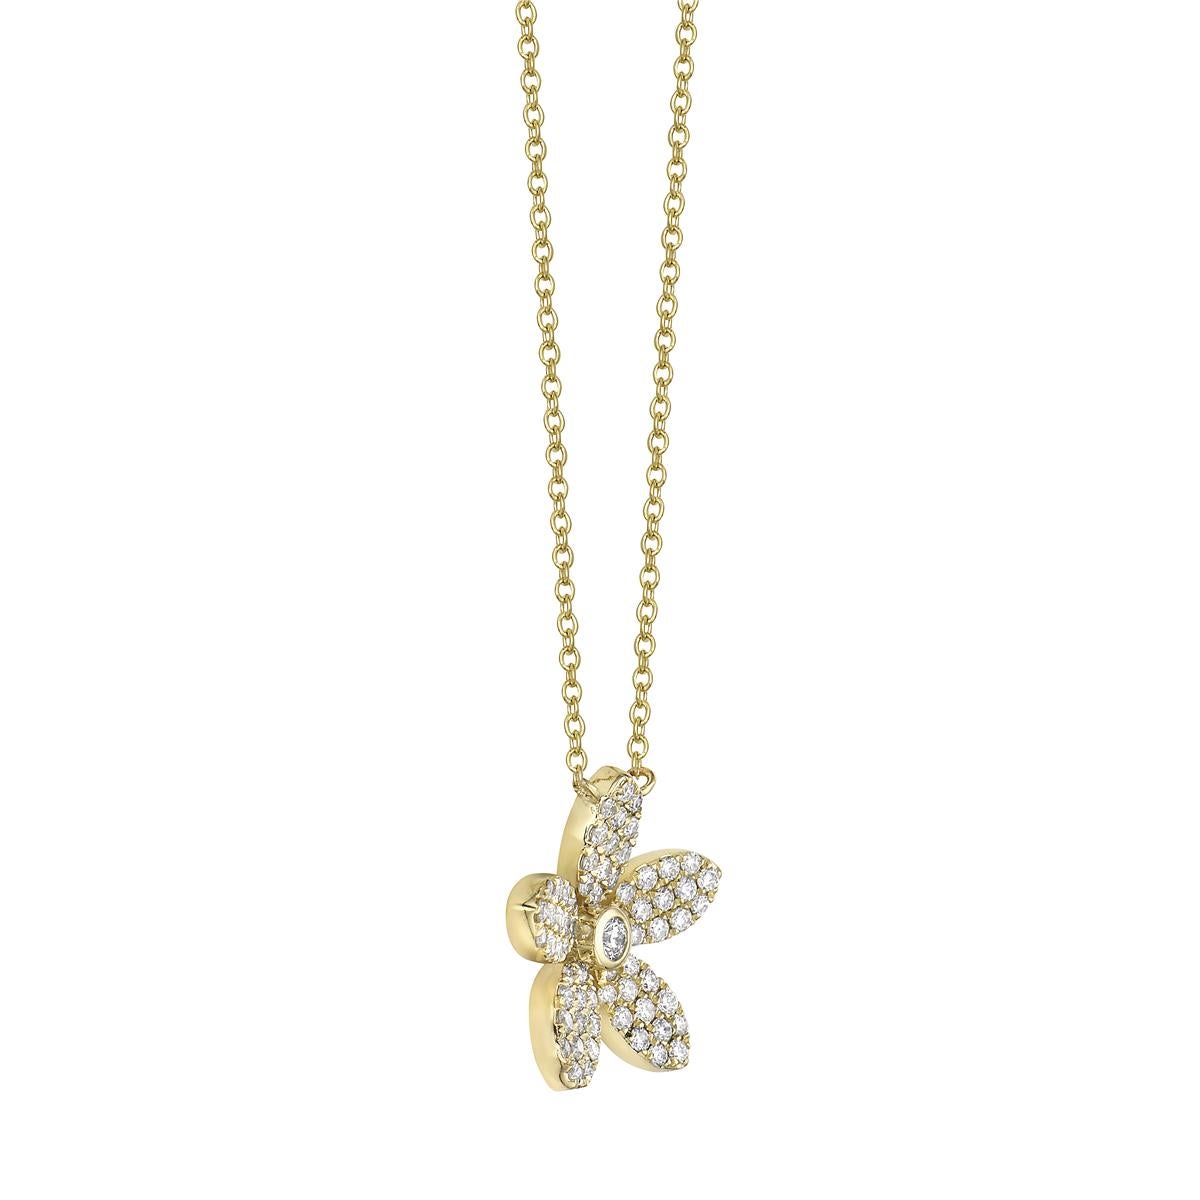 With this exquisite yellow gold diamond flower pendant, style and glamour are in the spotlight. This 14-karat pendant is made from 1.1 grams of gold, with a total of 66 round diamonds totaling 0.38 carats, all in SI1-SI2, GH color. A 14-karat